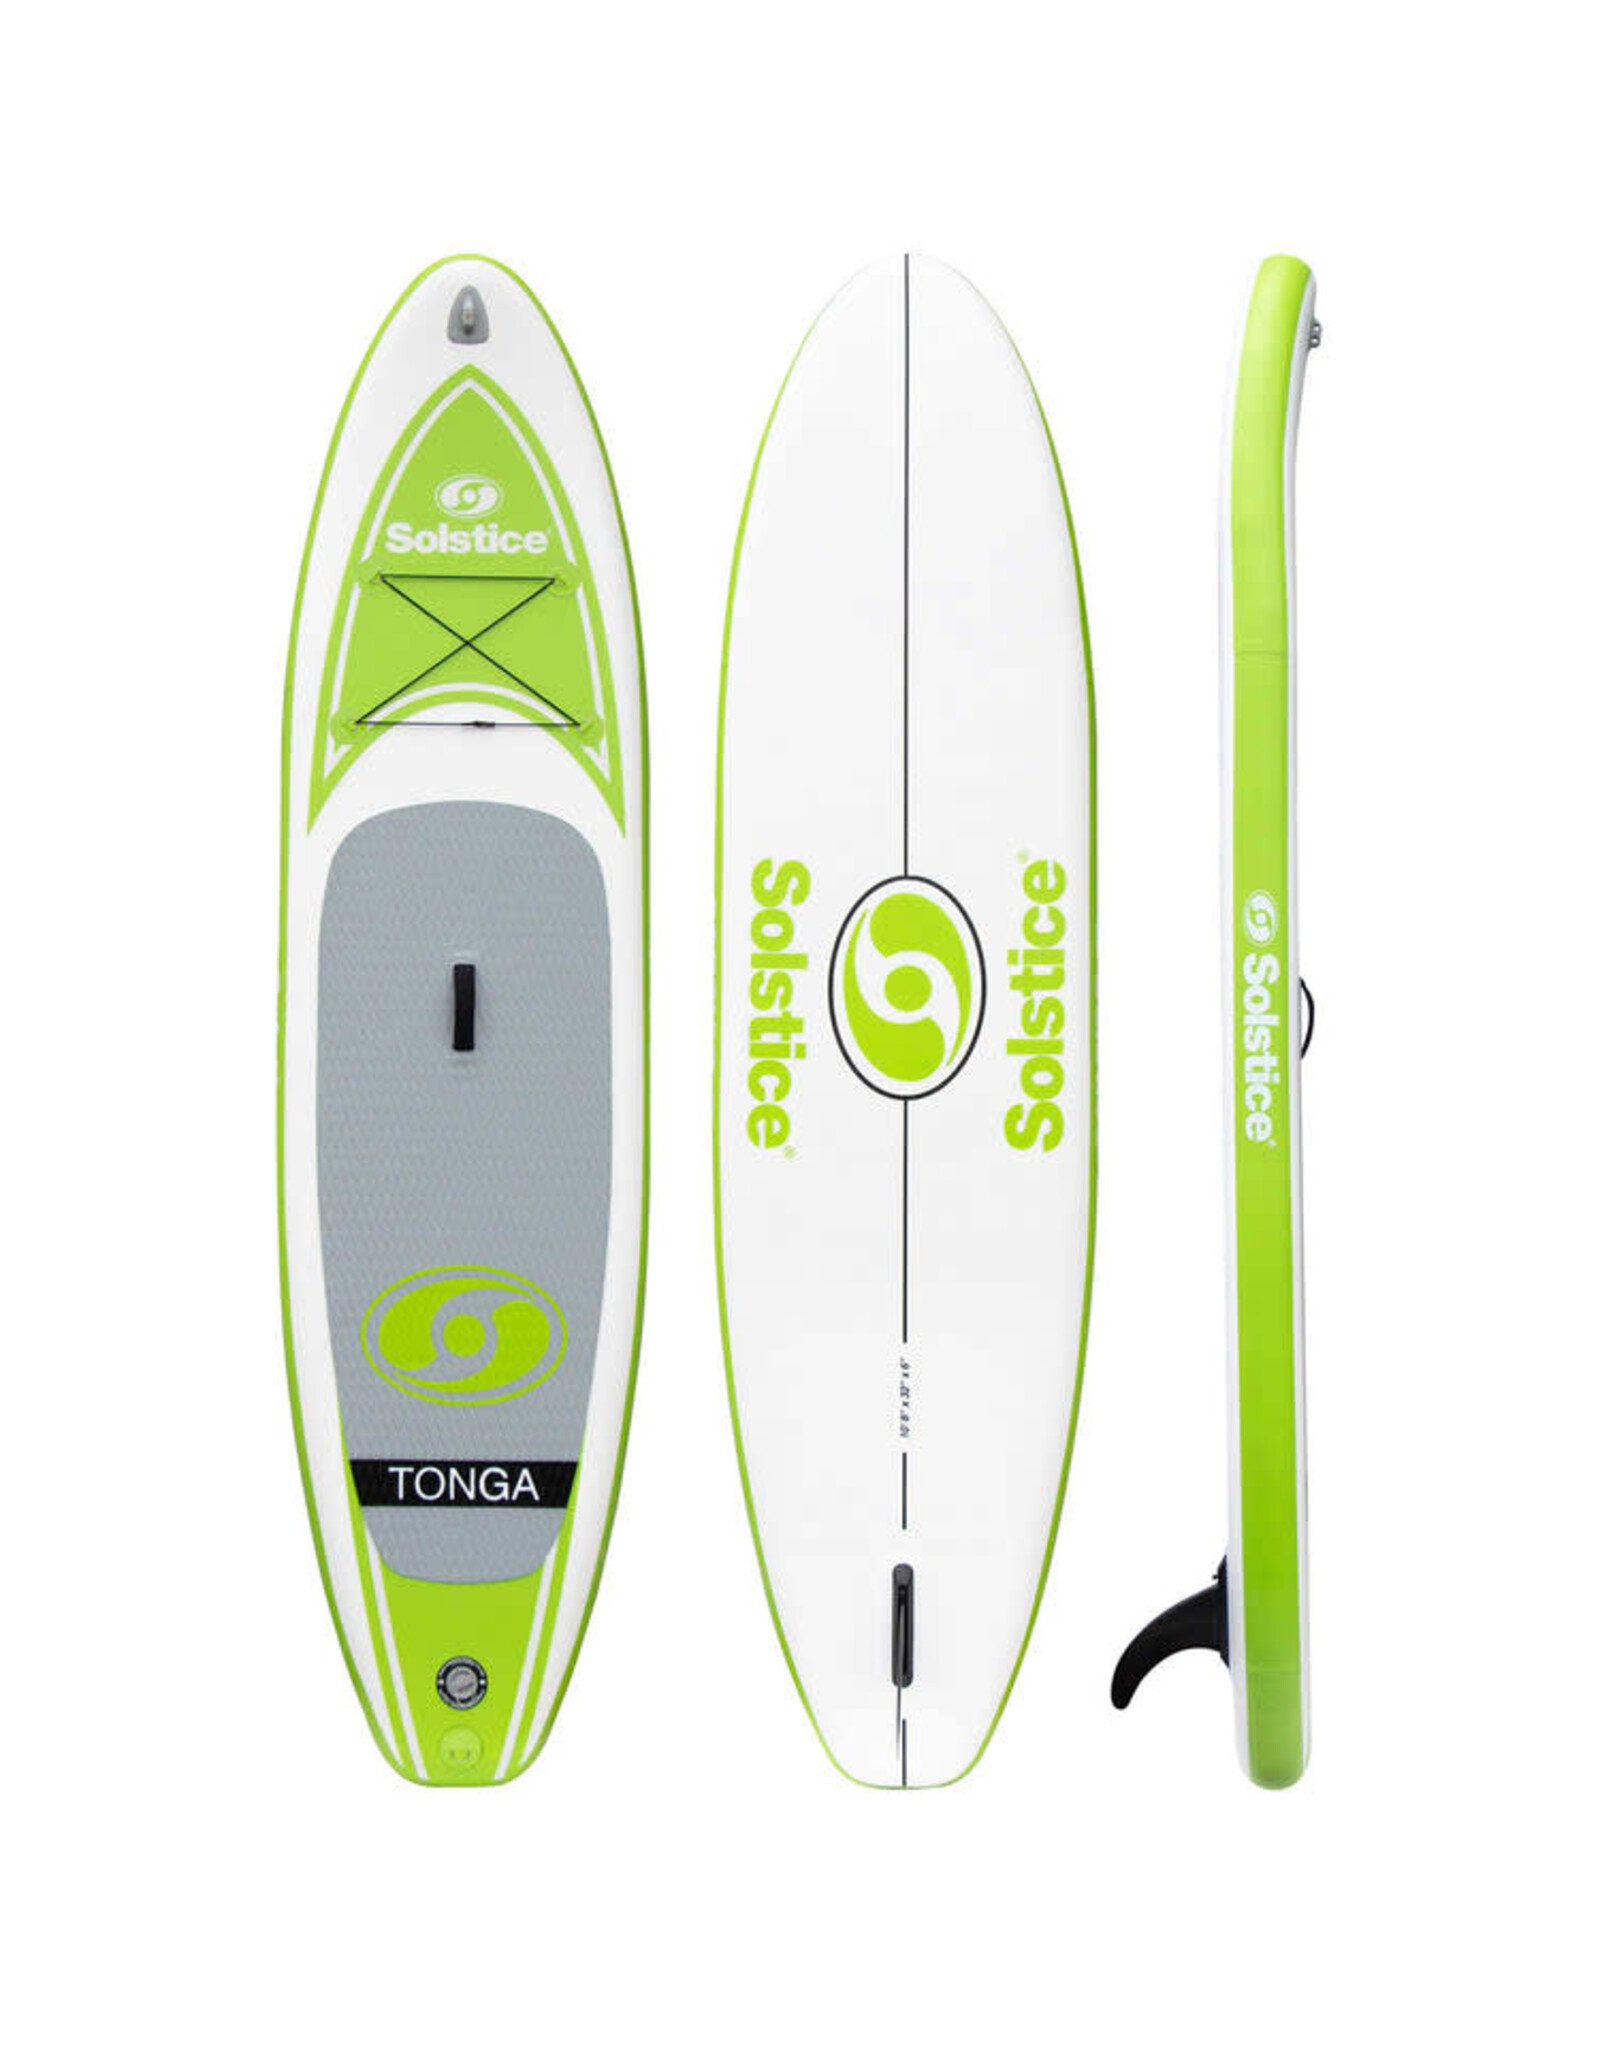 Solstice Tonga Inflatable Stand-Up Paddleboard Kit 10'8"